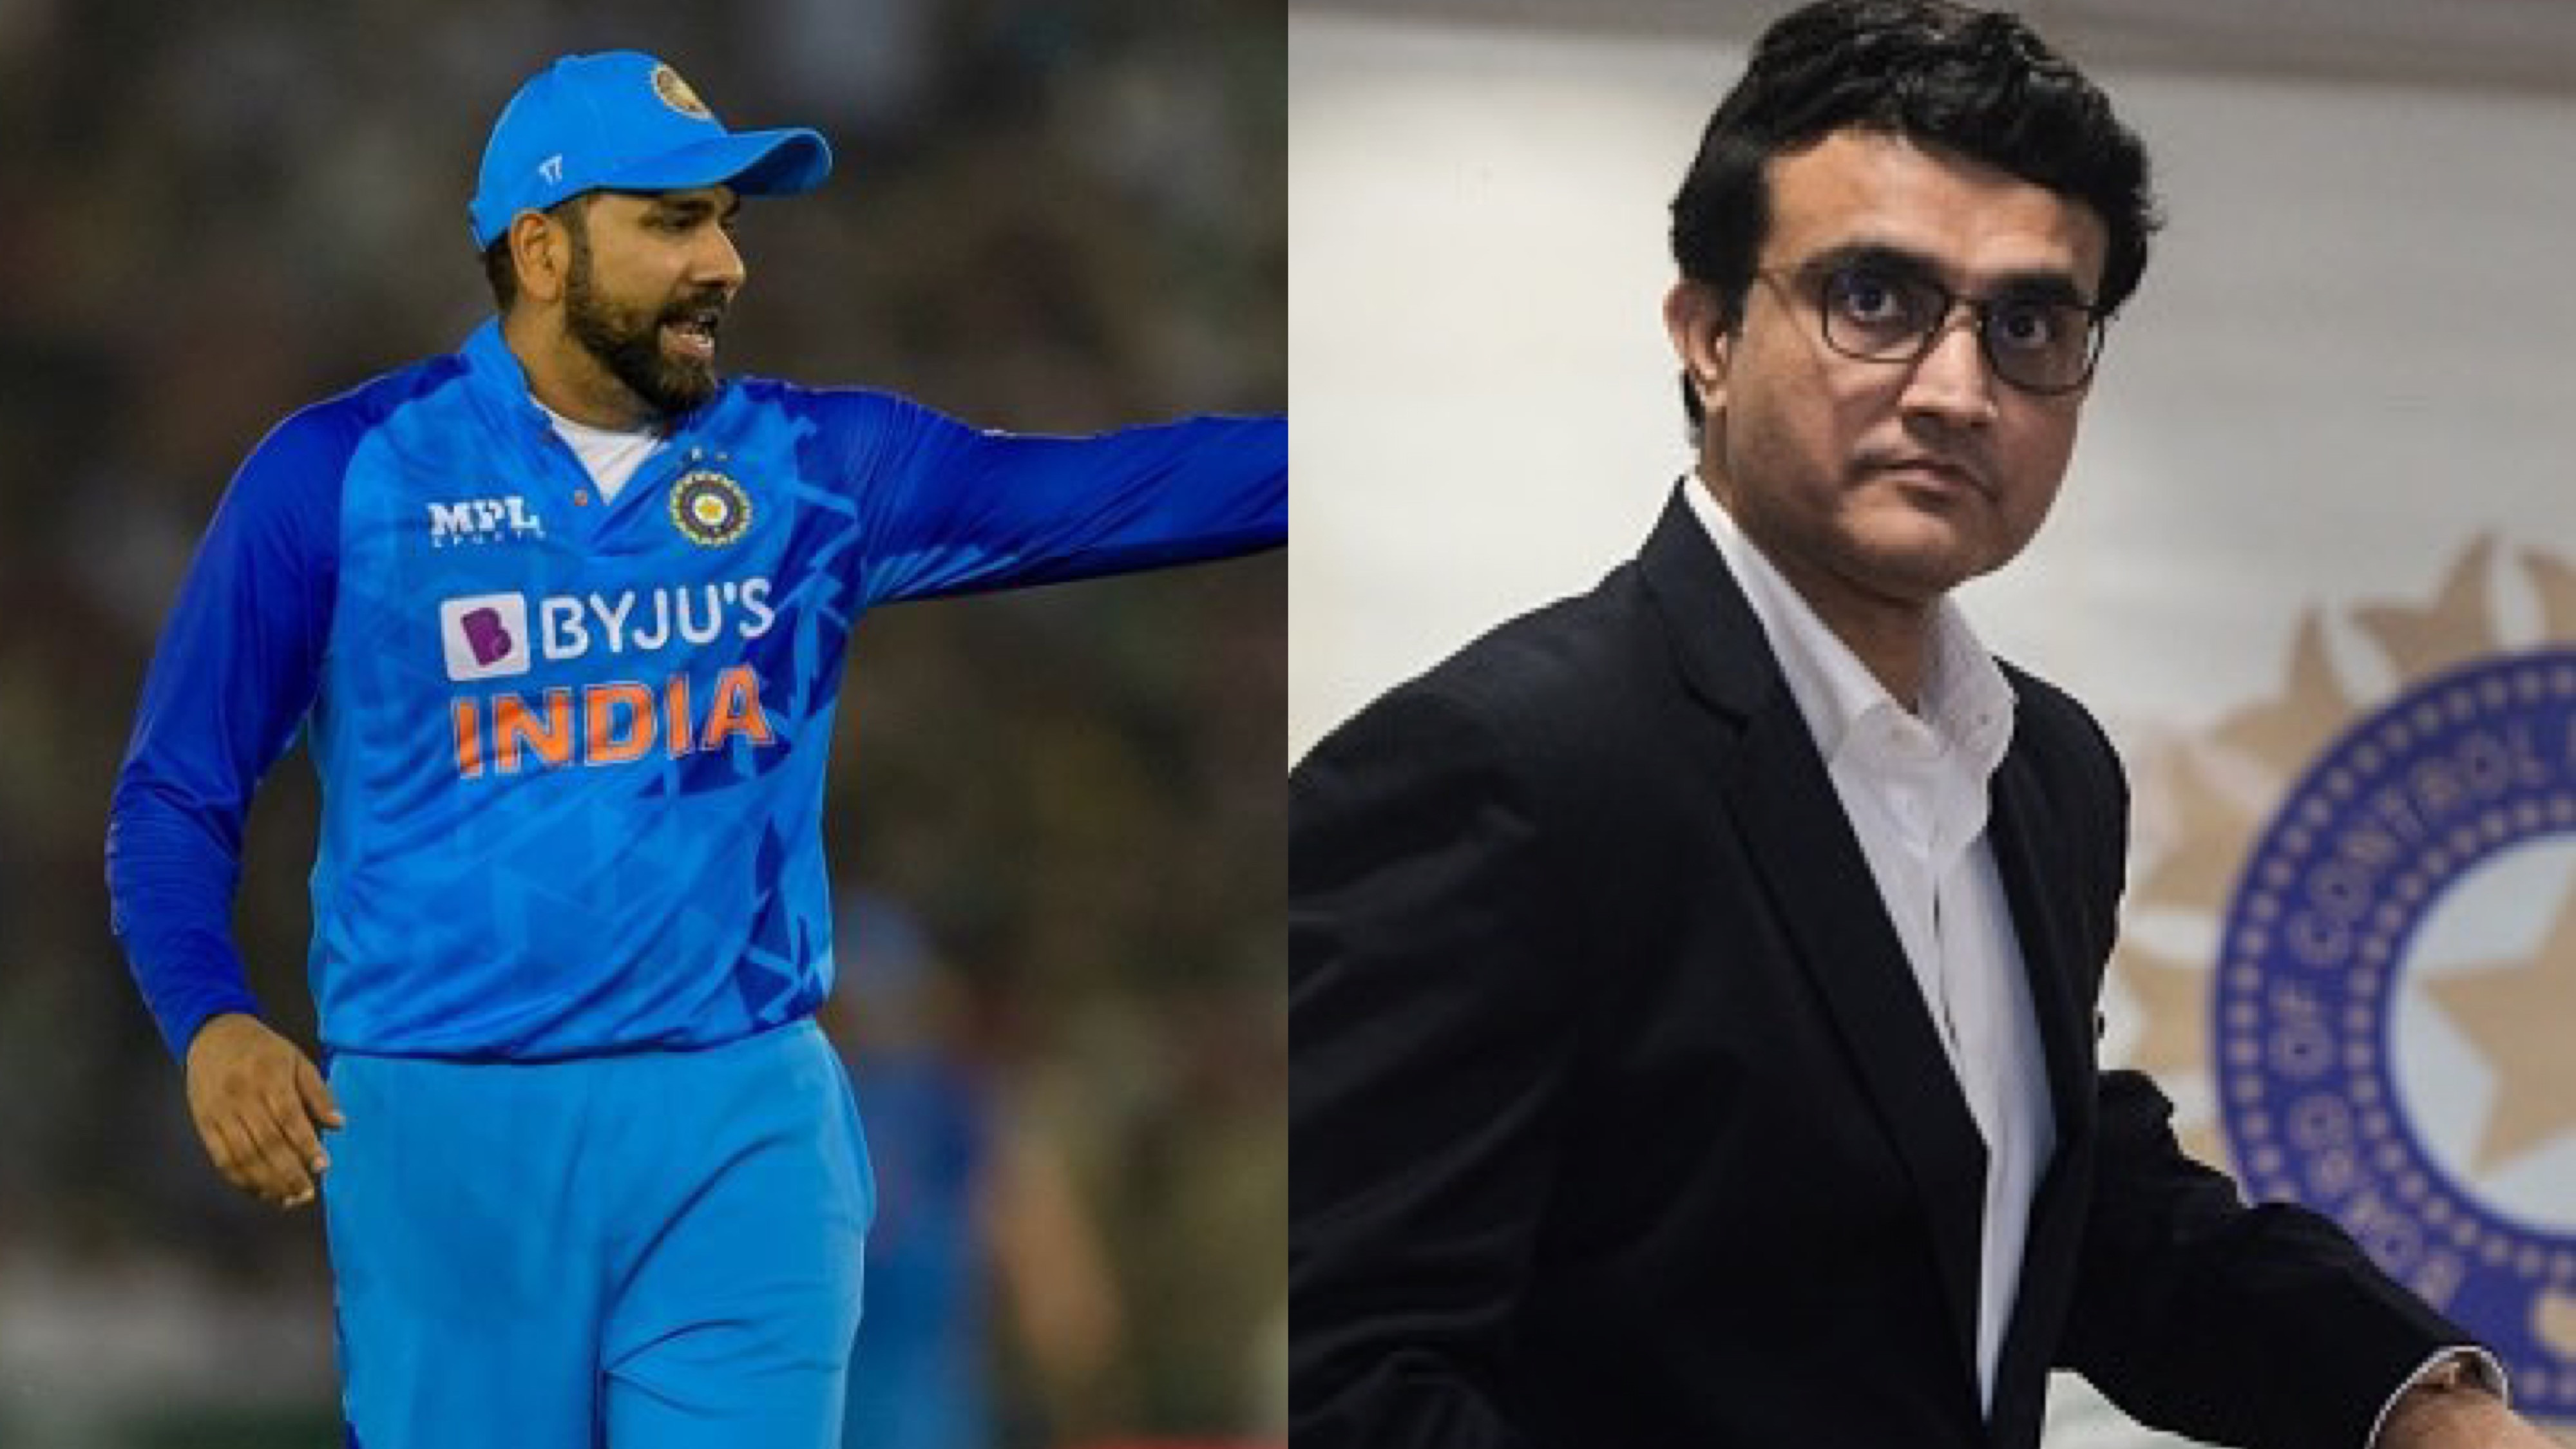 “Not worried about one or two losses,” BCCI president Sourav Ganguly unperturbed by India’s recent slump